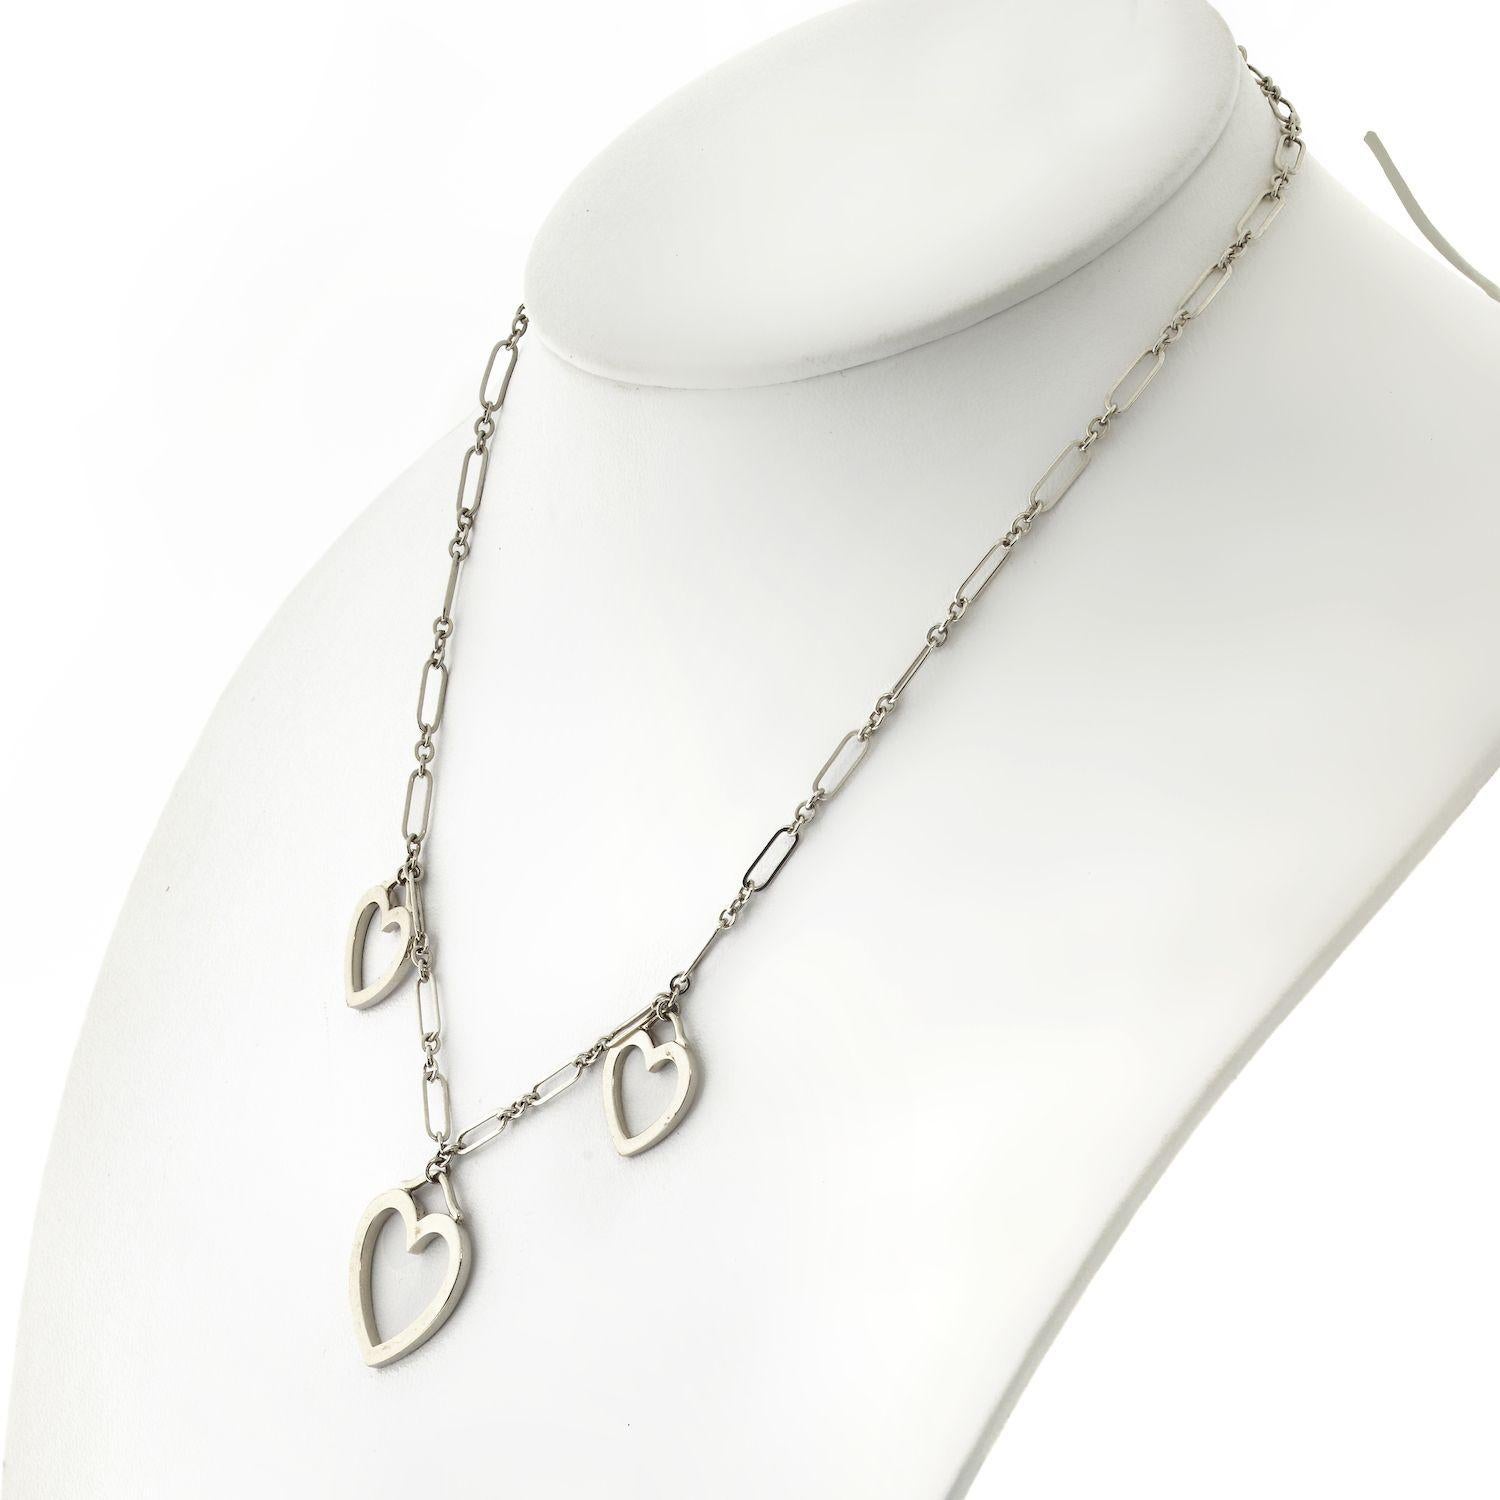 Tiffany & Co. 18K White Gold Triple Sentimental Heart Pendant Necklace. This authentic Tiffany & Co. piece is finely crafted from solid 18k white gold. It features a unique chain link design along with 3 beautiful heart pendants which look great on